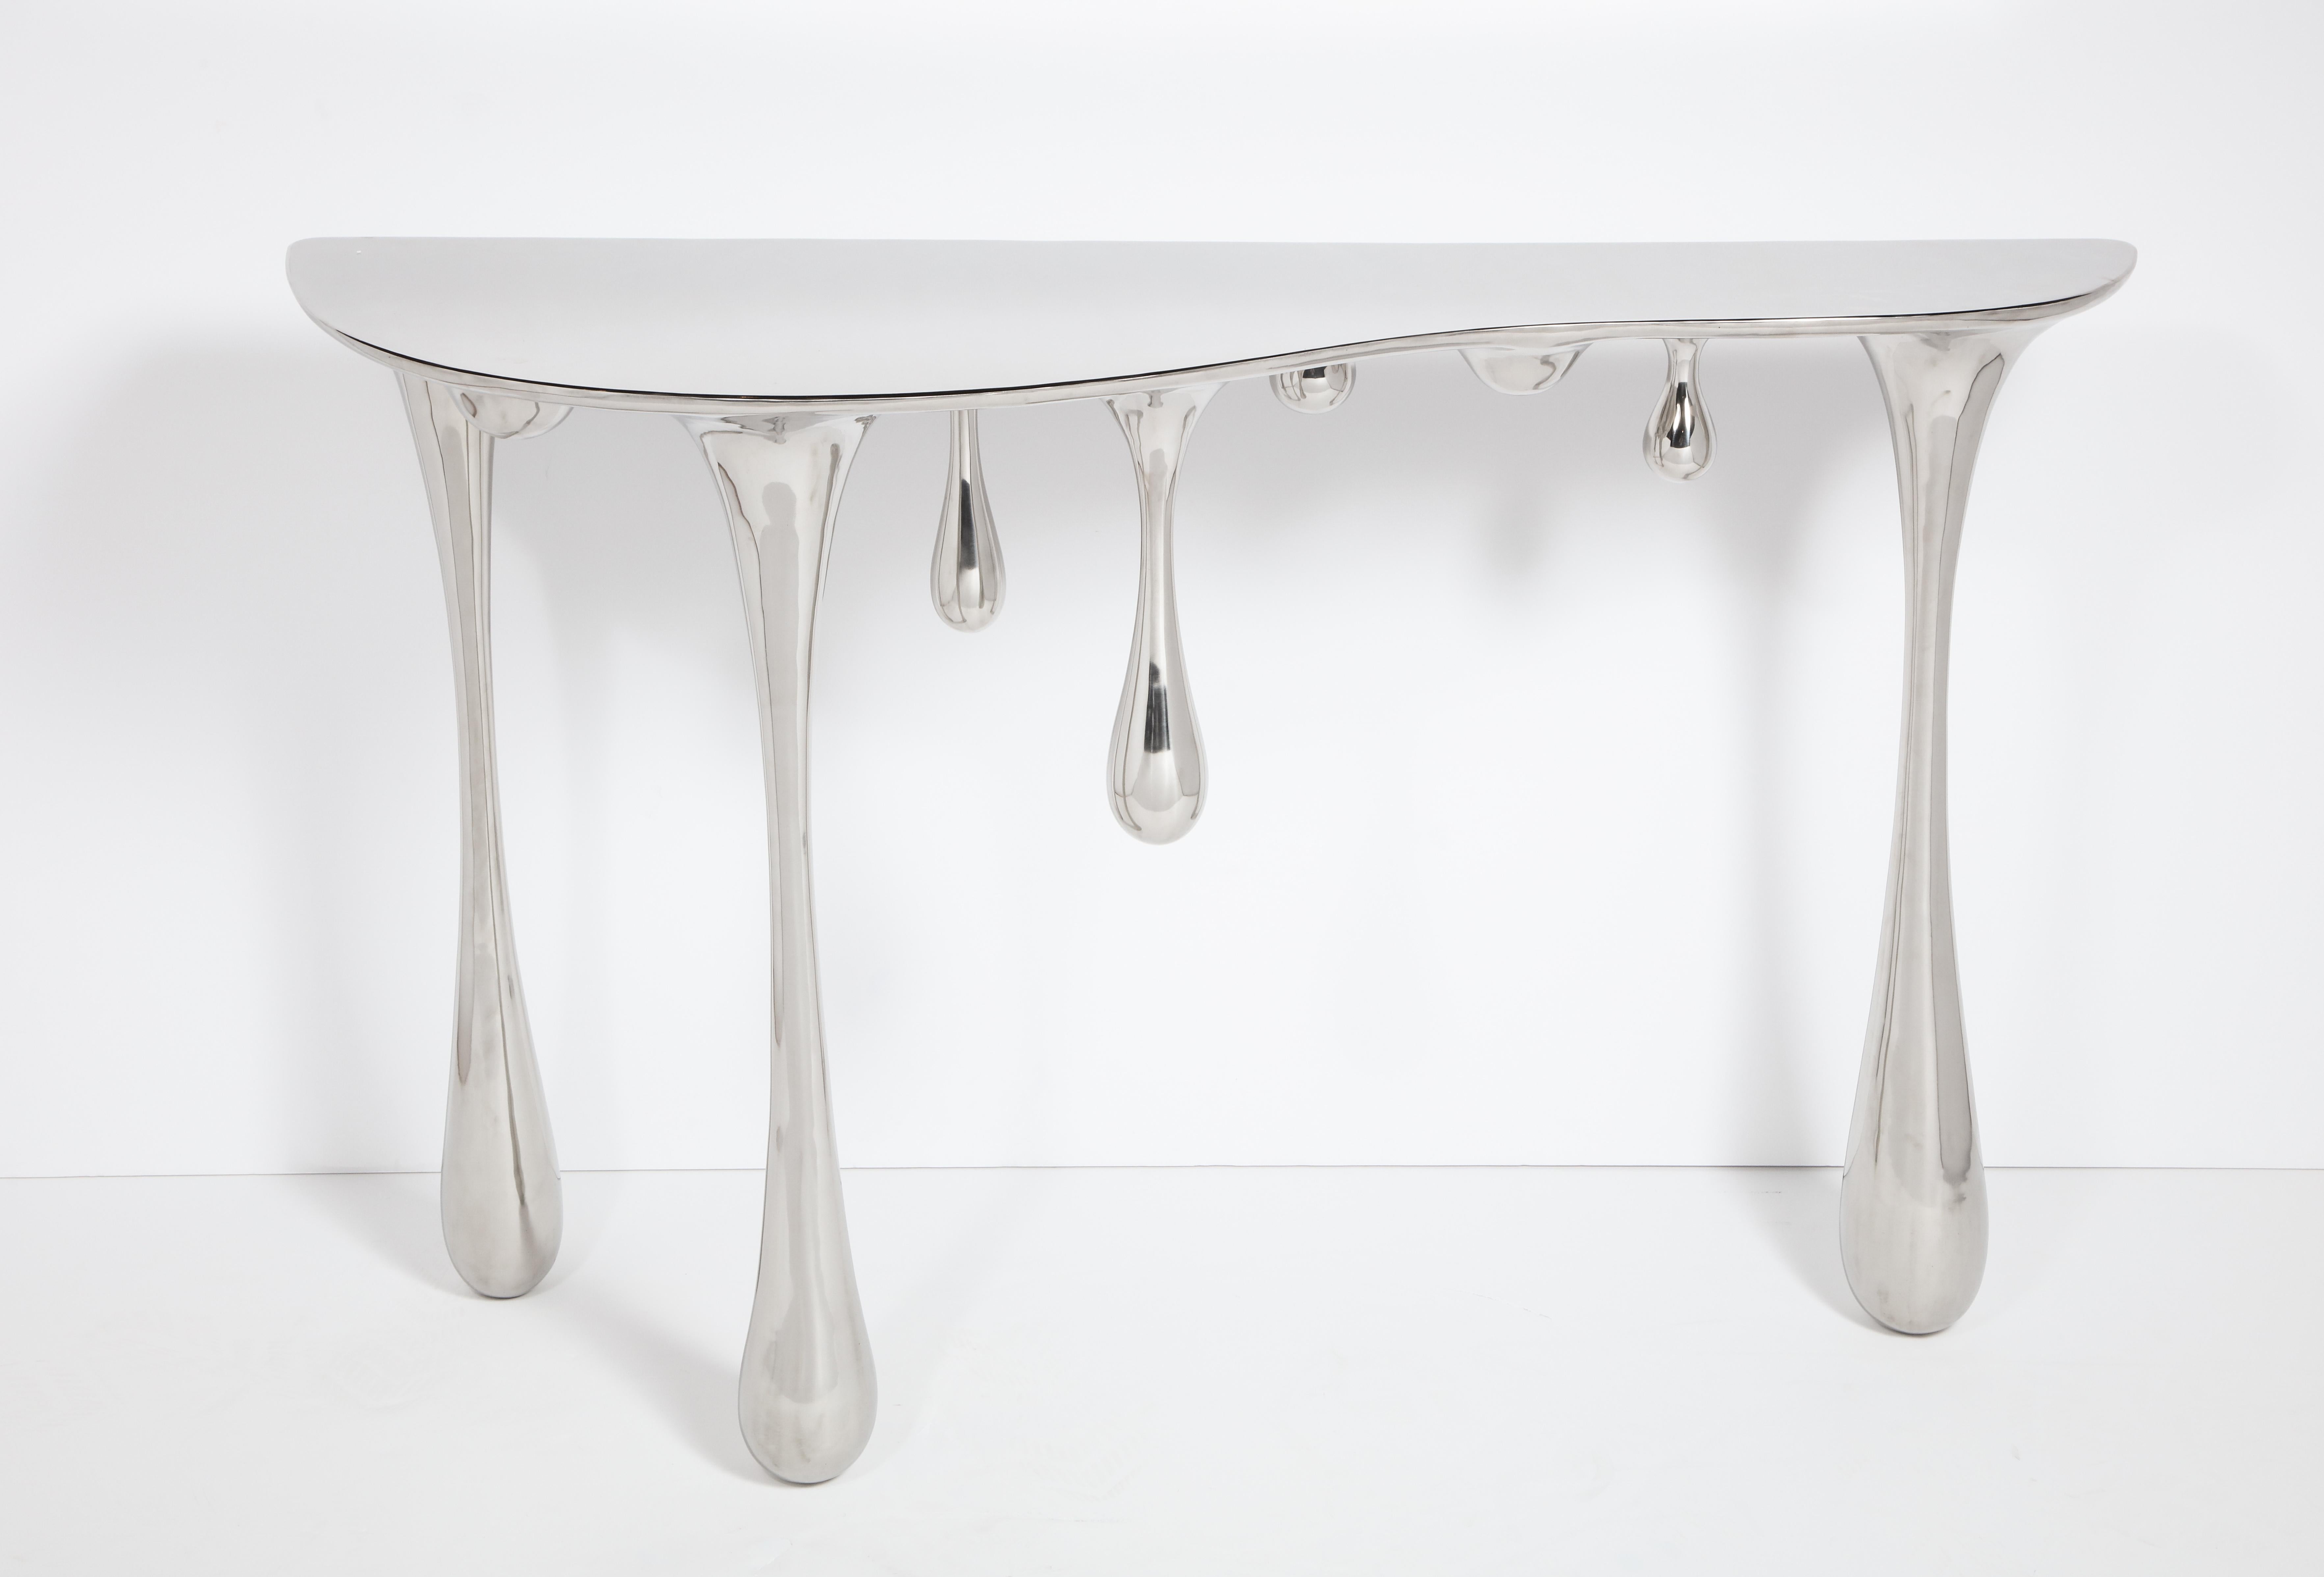 Chinese Dripping Console Table No.2 Hallway Entry Table Stainless Steel Customizable